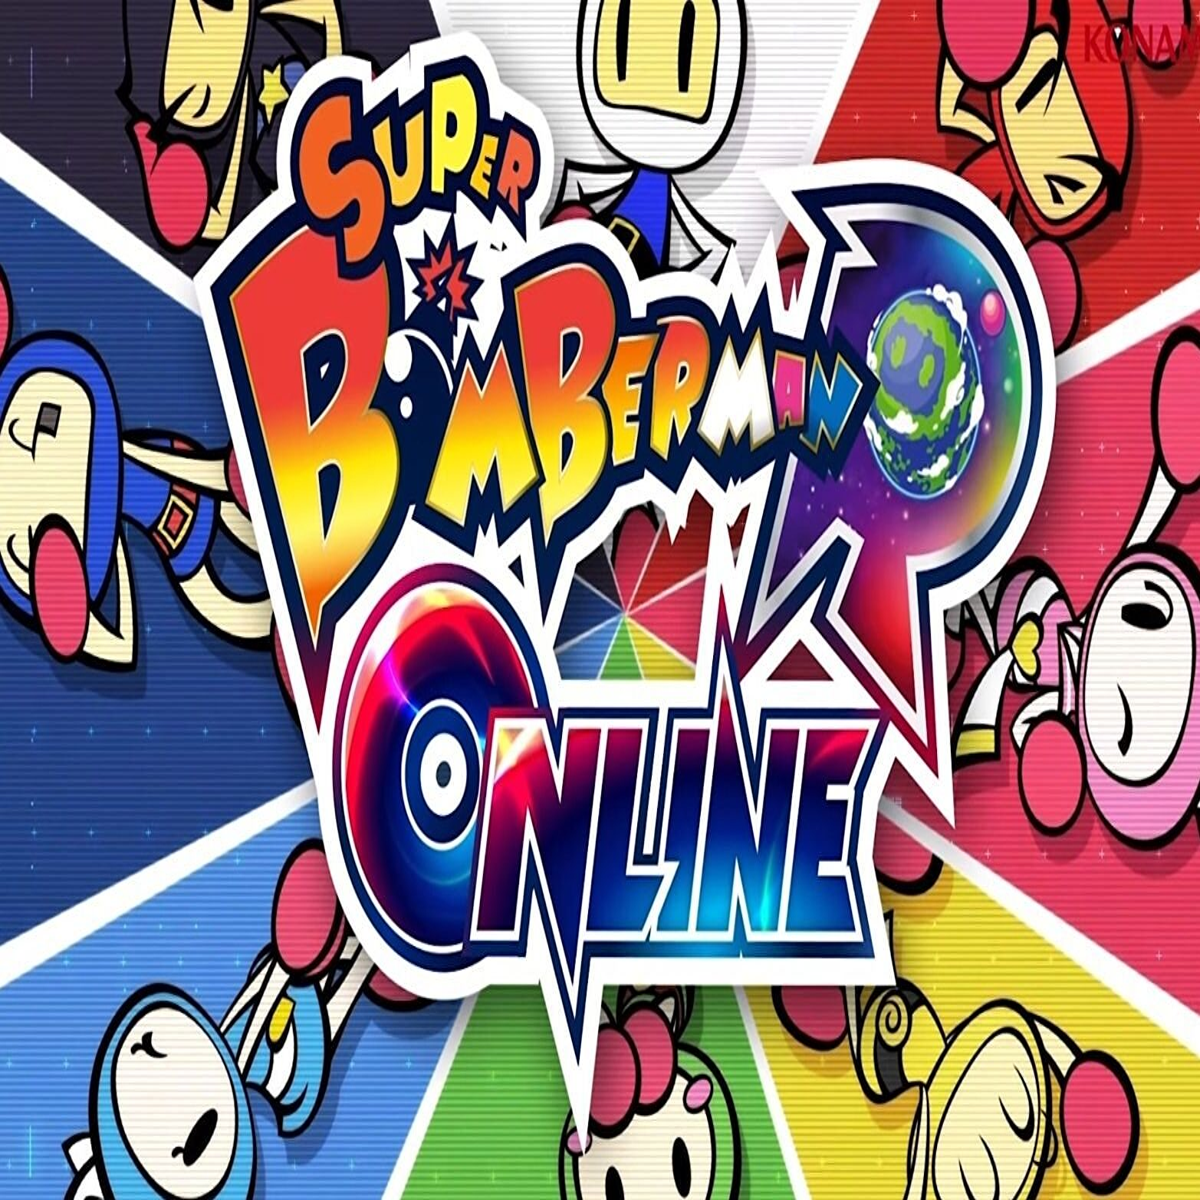 Super Bomberman R Online blasts onto Steam, Switch, and other consoles